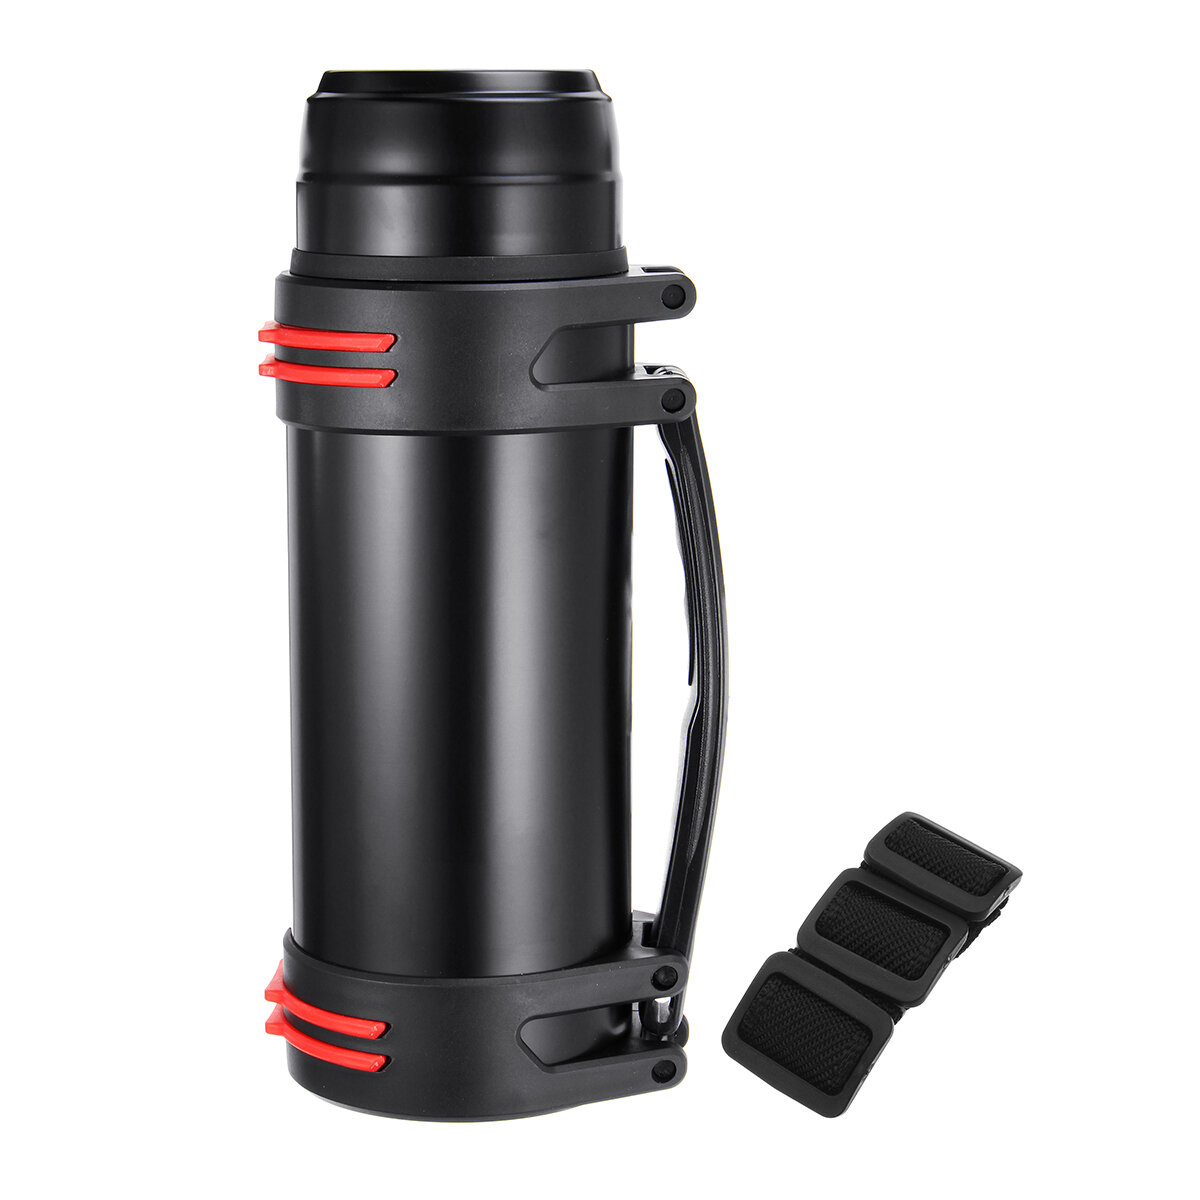 BIKIGHT 2L Stainless Steelthermos Travel Mug Flask Thermal Hot Water Insulated Bottle